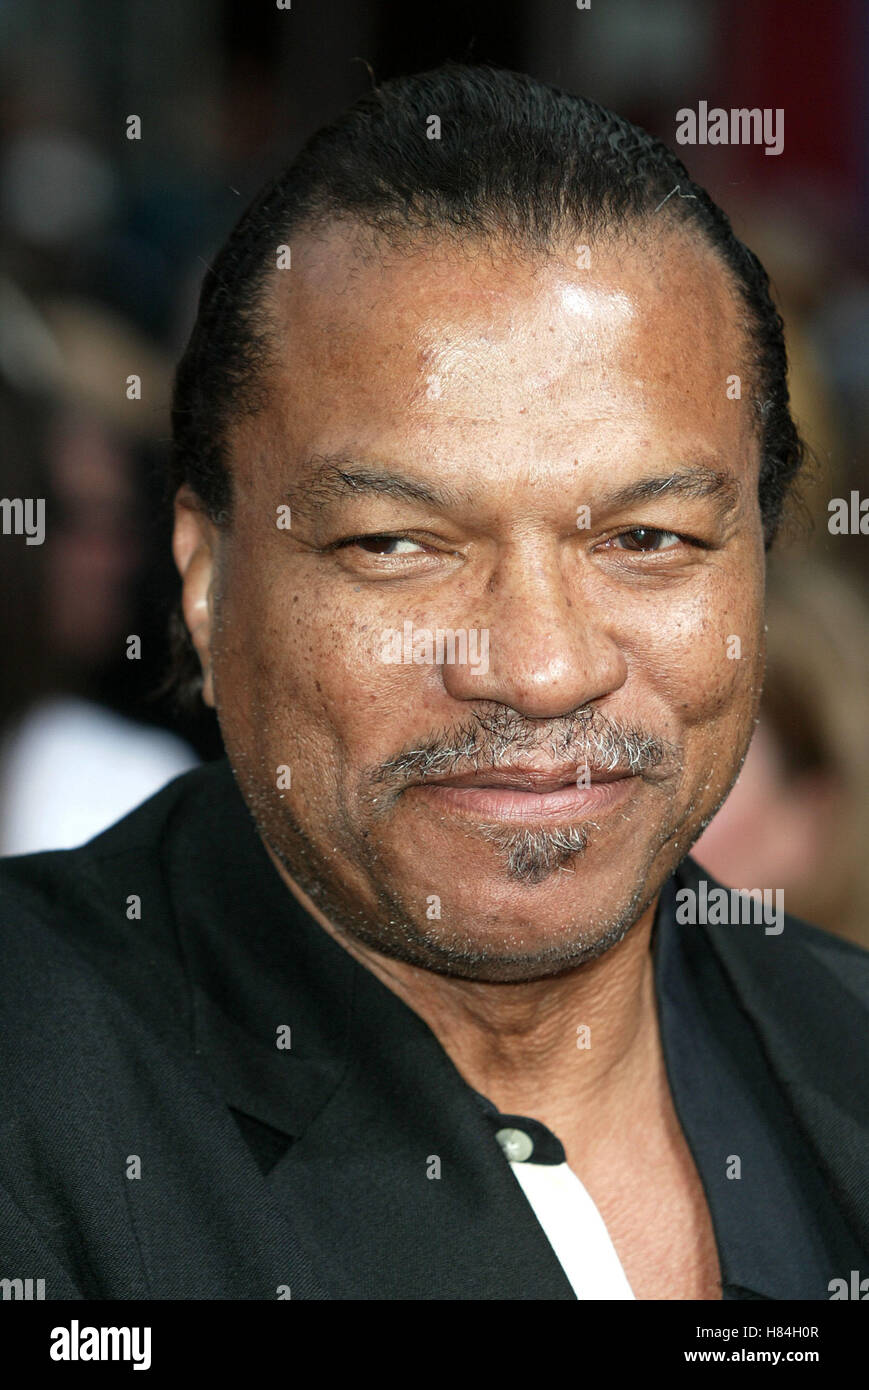 BILLY DEE WILLIAMS UNDERCOVER BROTHER PREM FILM UNIVERSAL CITYWALK BURBANK LOS ANGELES USA 30 mai 2002 Banque D'Images